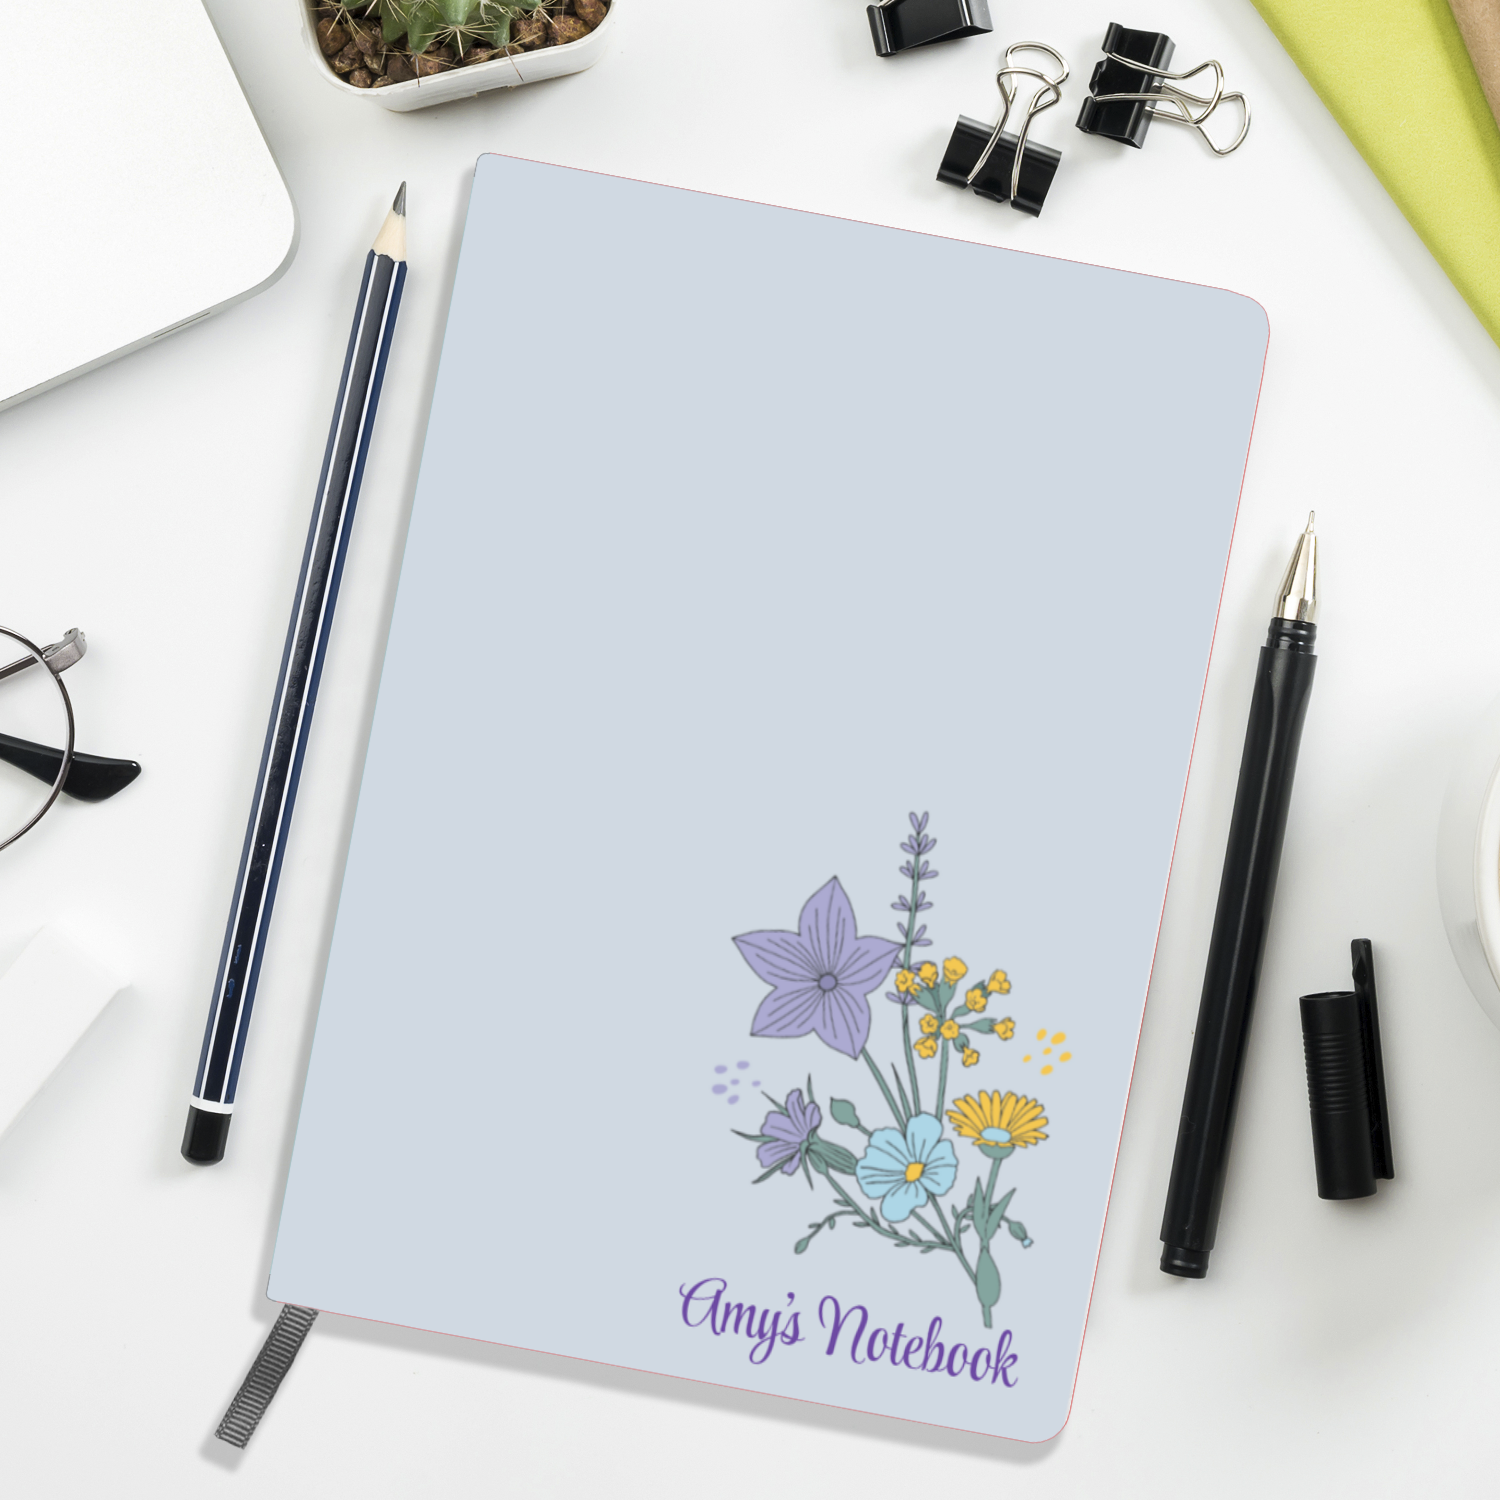 Personalized Notebook/Journals - Personalized Floral Journal 